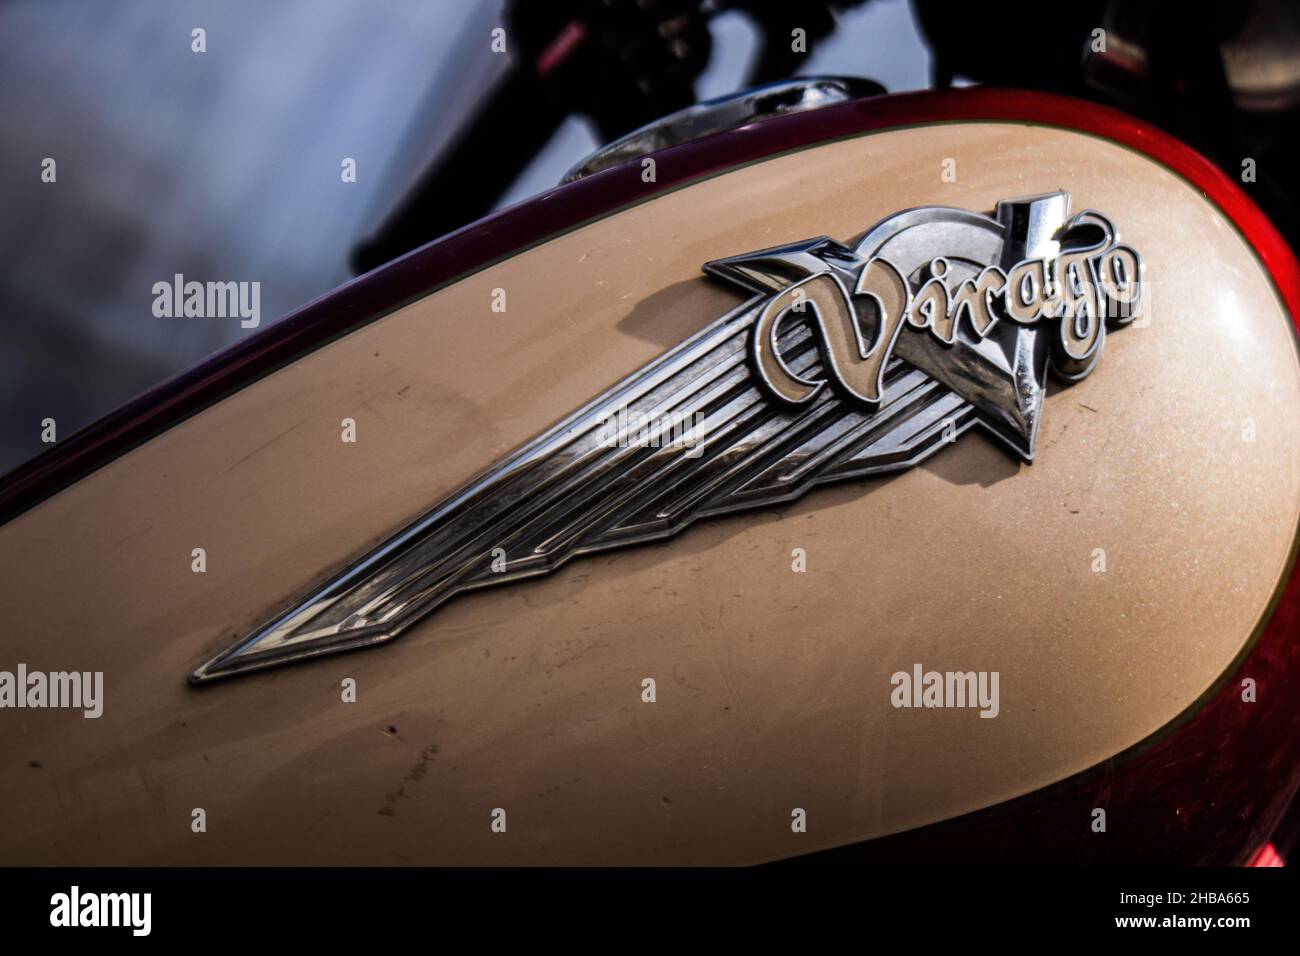 Limassol, Cyprus - December 17, 2021 Closeup of the mechanics of a Yamaha Virago motorcycle parked in a parking lot located in the city center of Lima Stock Photo